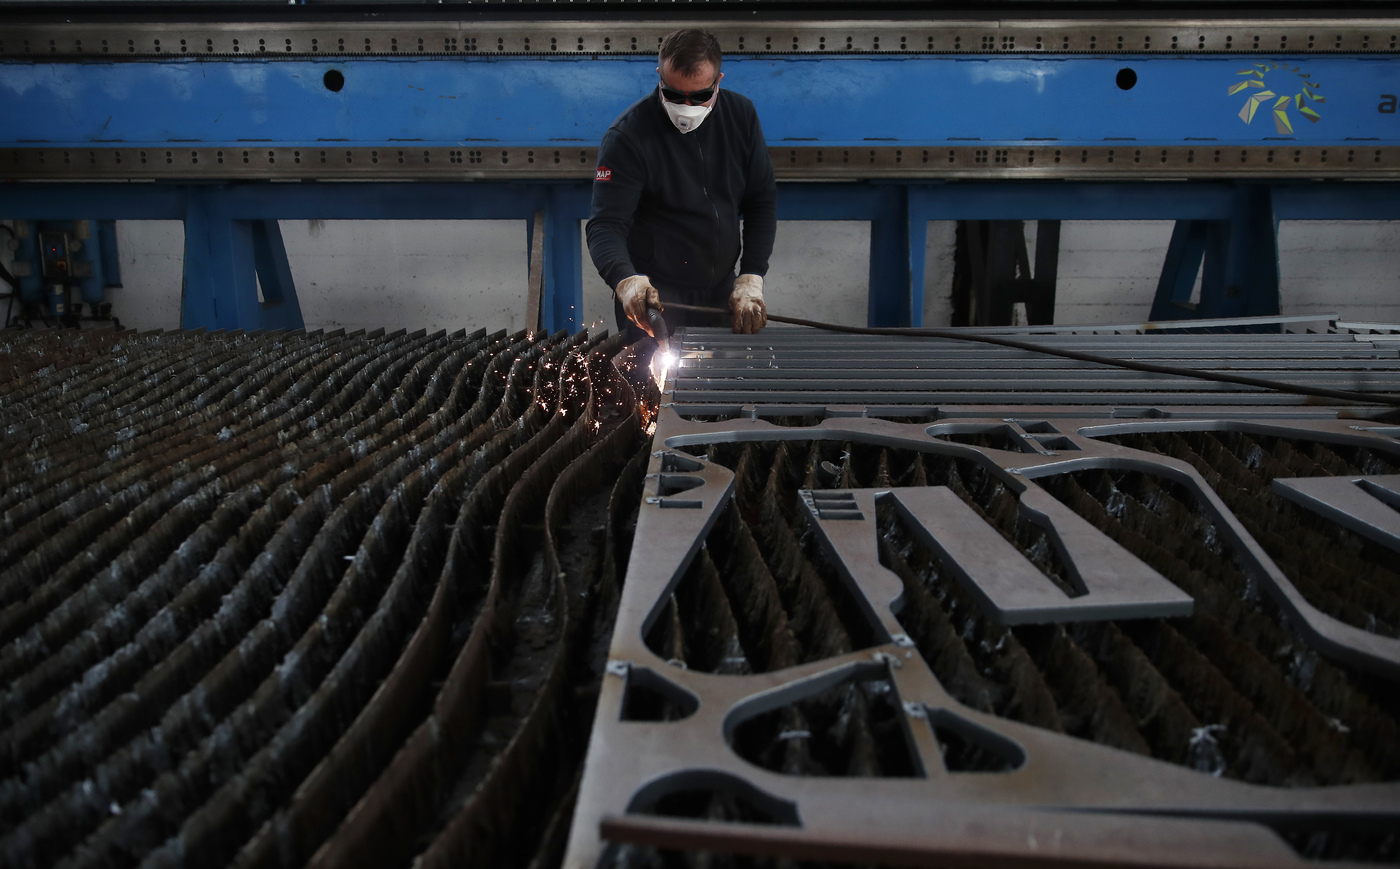 A man works at MAP, a factory operating in design, manufacture and installation of steel structures for civil and industrial use, in Corsico, near Milan, Italy, Wednesday, May 6, 2020. Italy began stirring again after the coronavirus shutdown, with 4.4 million Italians able to return to work and restrictions on movement eased in the first European country to lock down in a bid to stem COVID-19 infections. (AP Photo/Antonio Calanni)